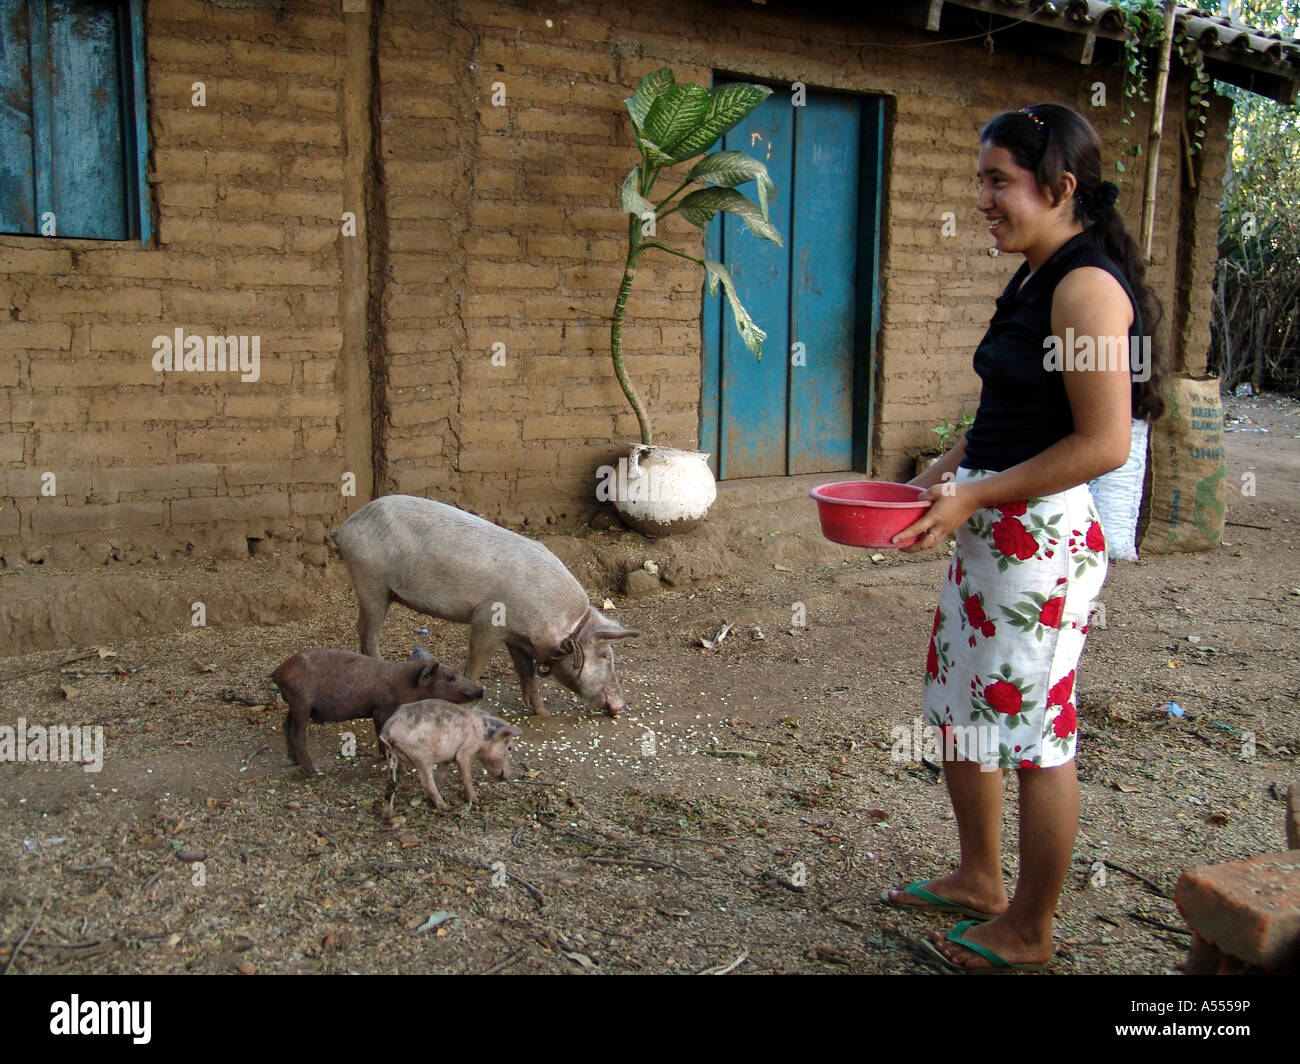 Painet ip2525 salvador woman feeding pigs san francsisco javier country developing nation less economically developed Stock Photo